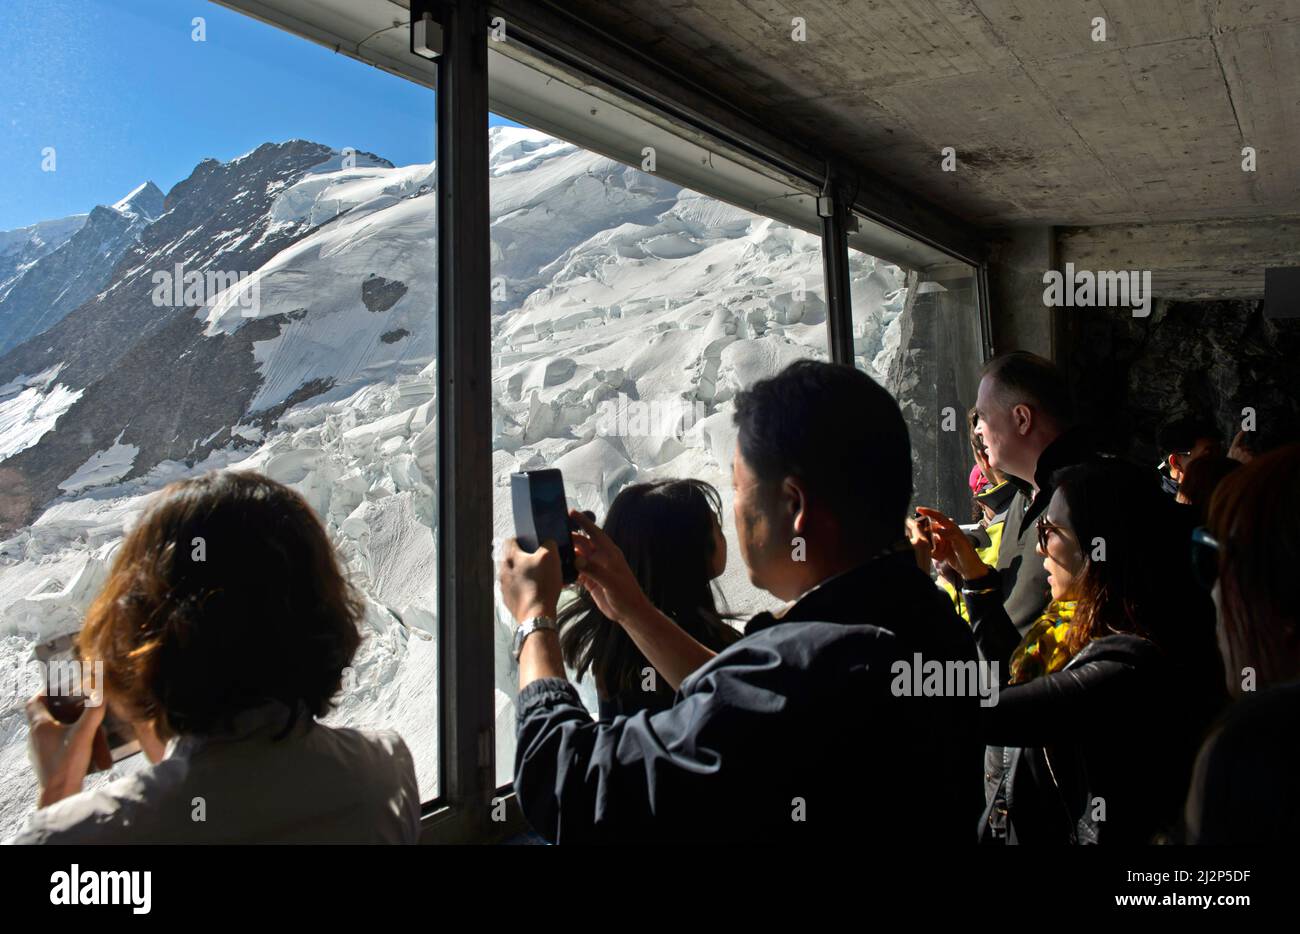 Tourists look through a glass window at the icefalls of the Eiger Glacier at the Eigerwand station of the Jungfrau Railway, Grindelwald,Switzerland Stock Photo